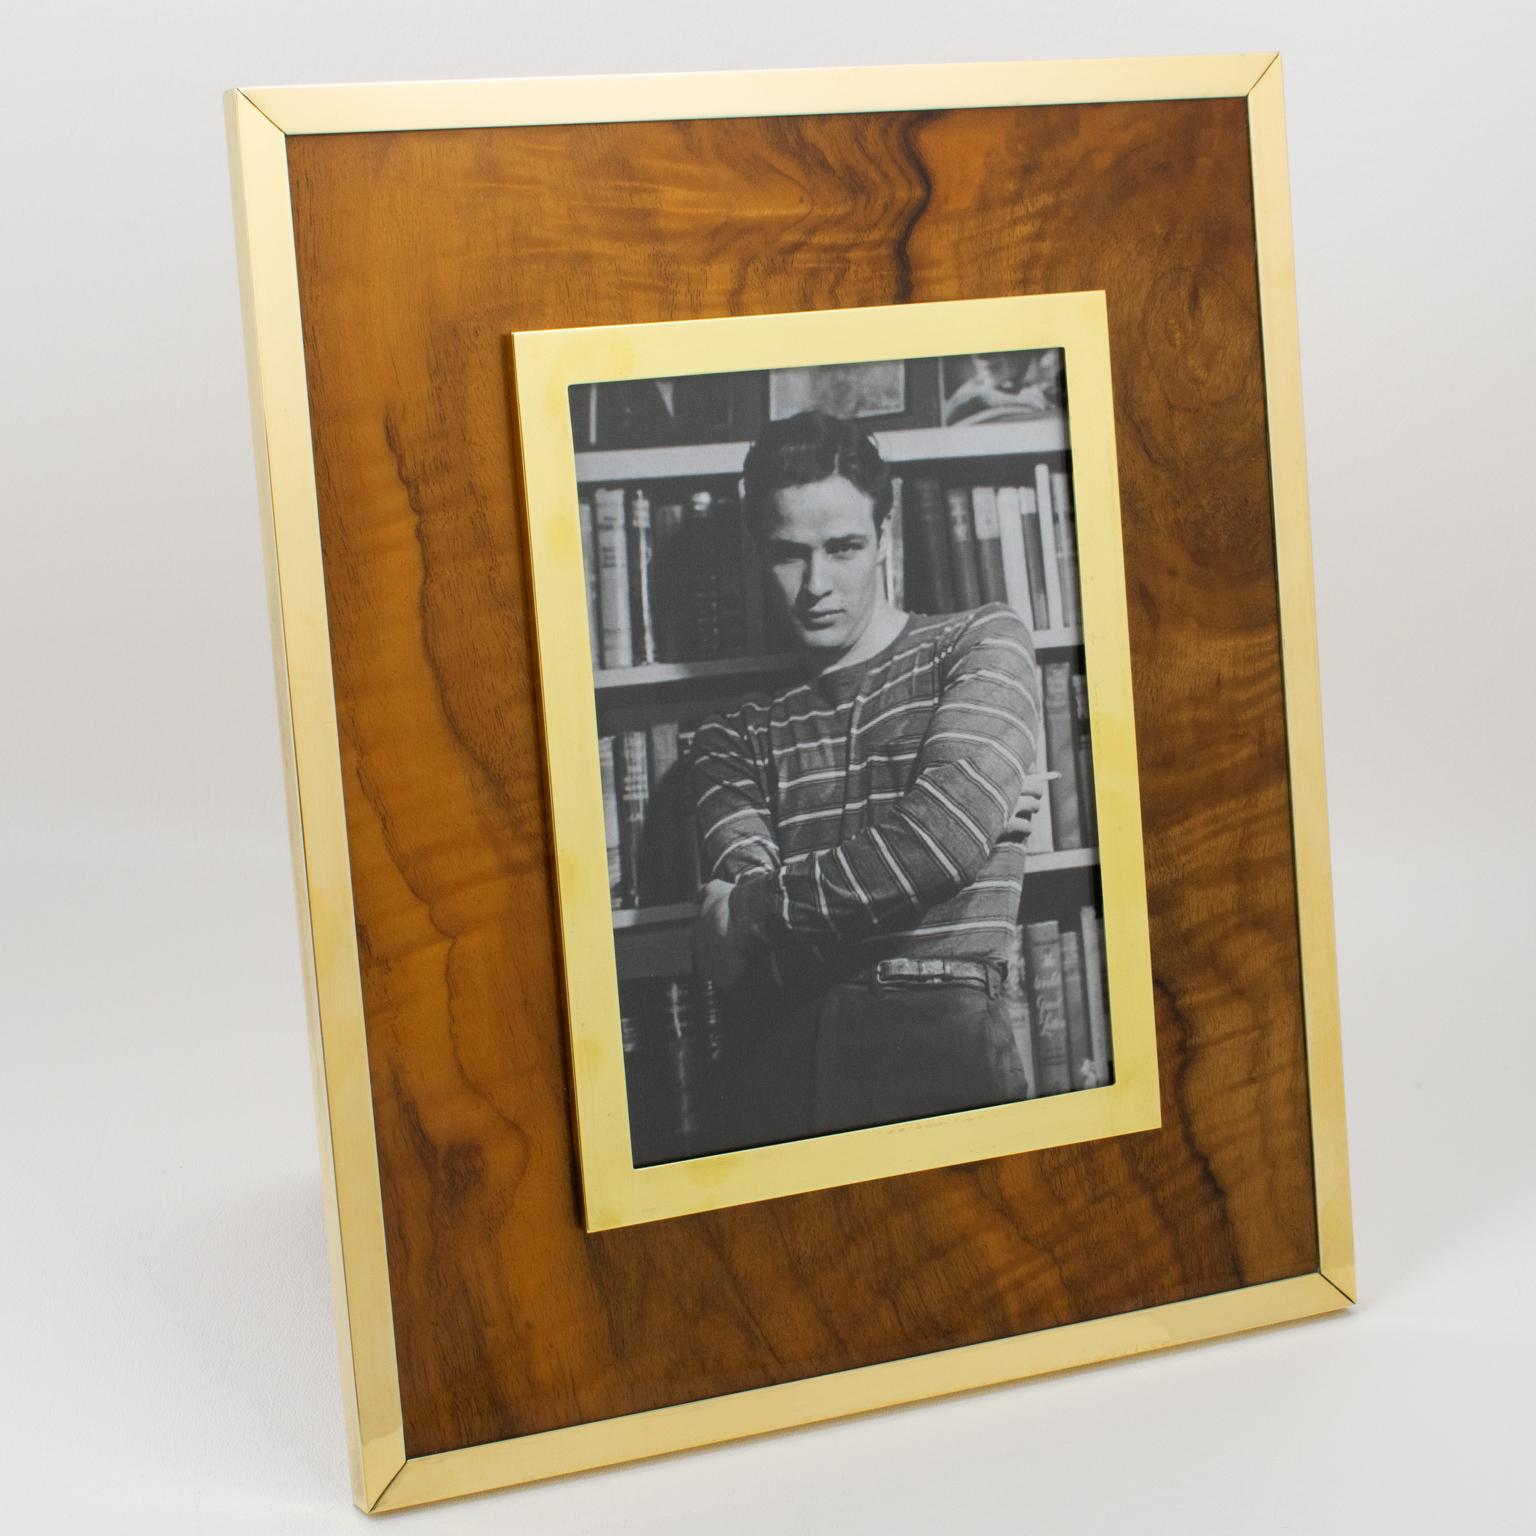 Montagnani Firenze, Italy, crafted this sophisticated picture photo frame in the 1970s. Its Mid-Century modernist design boasts a rectangular shape, with walnut wood geometric veneer complimented with polished gilded brass metal framings. The back